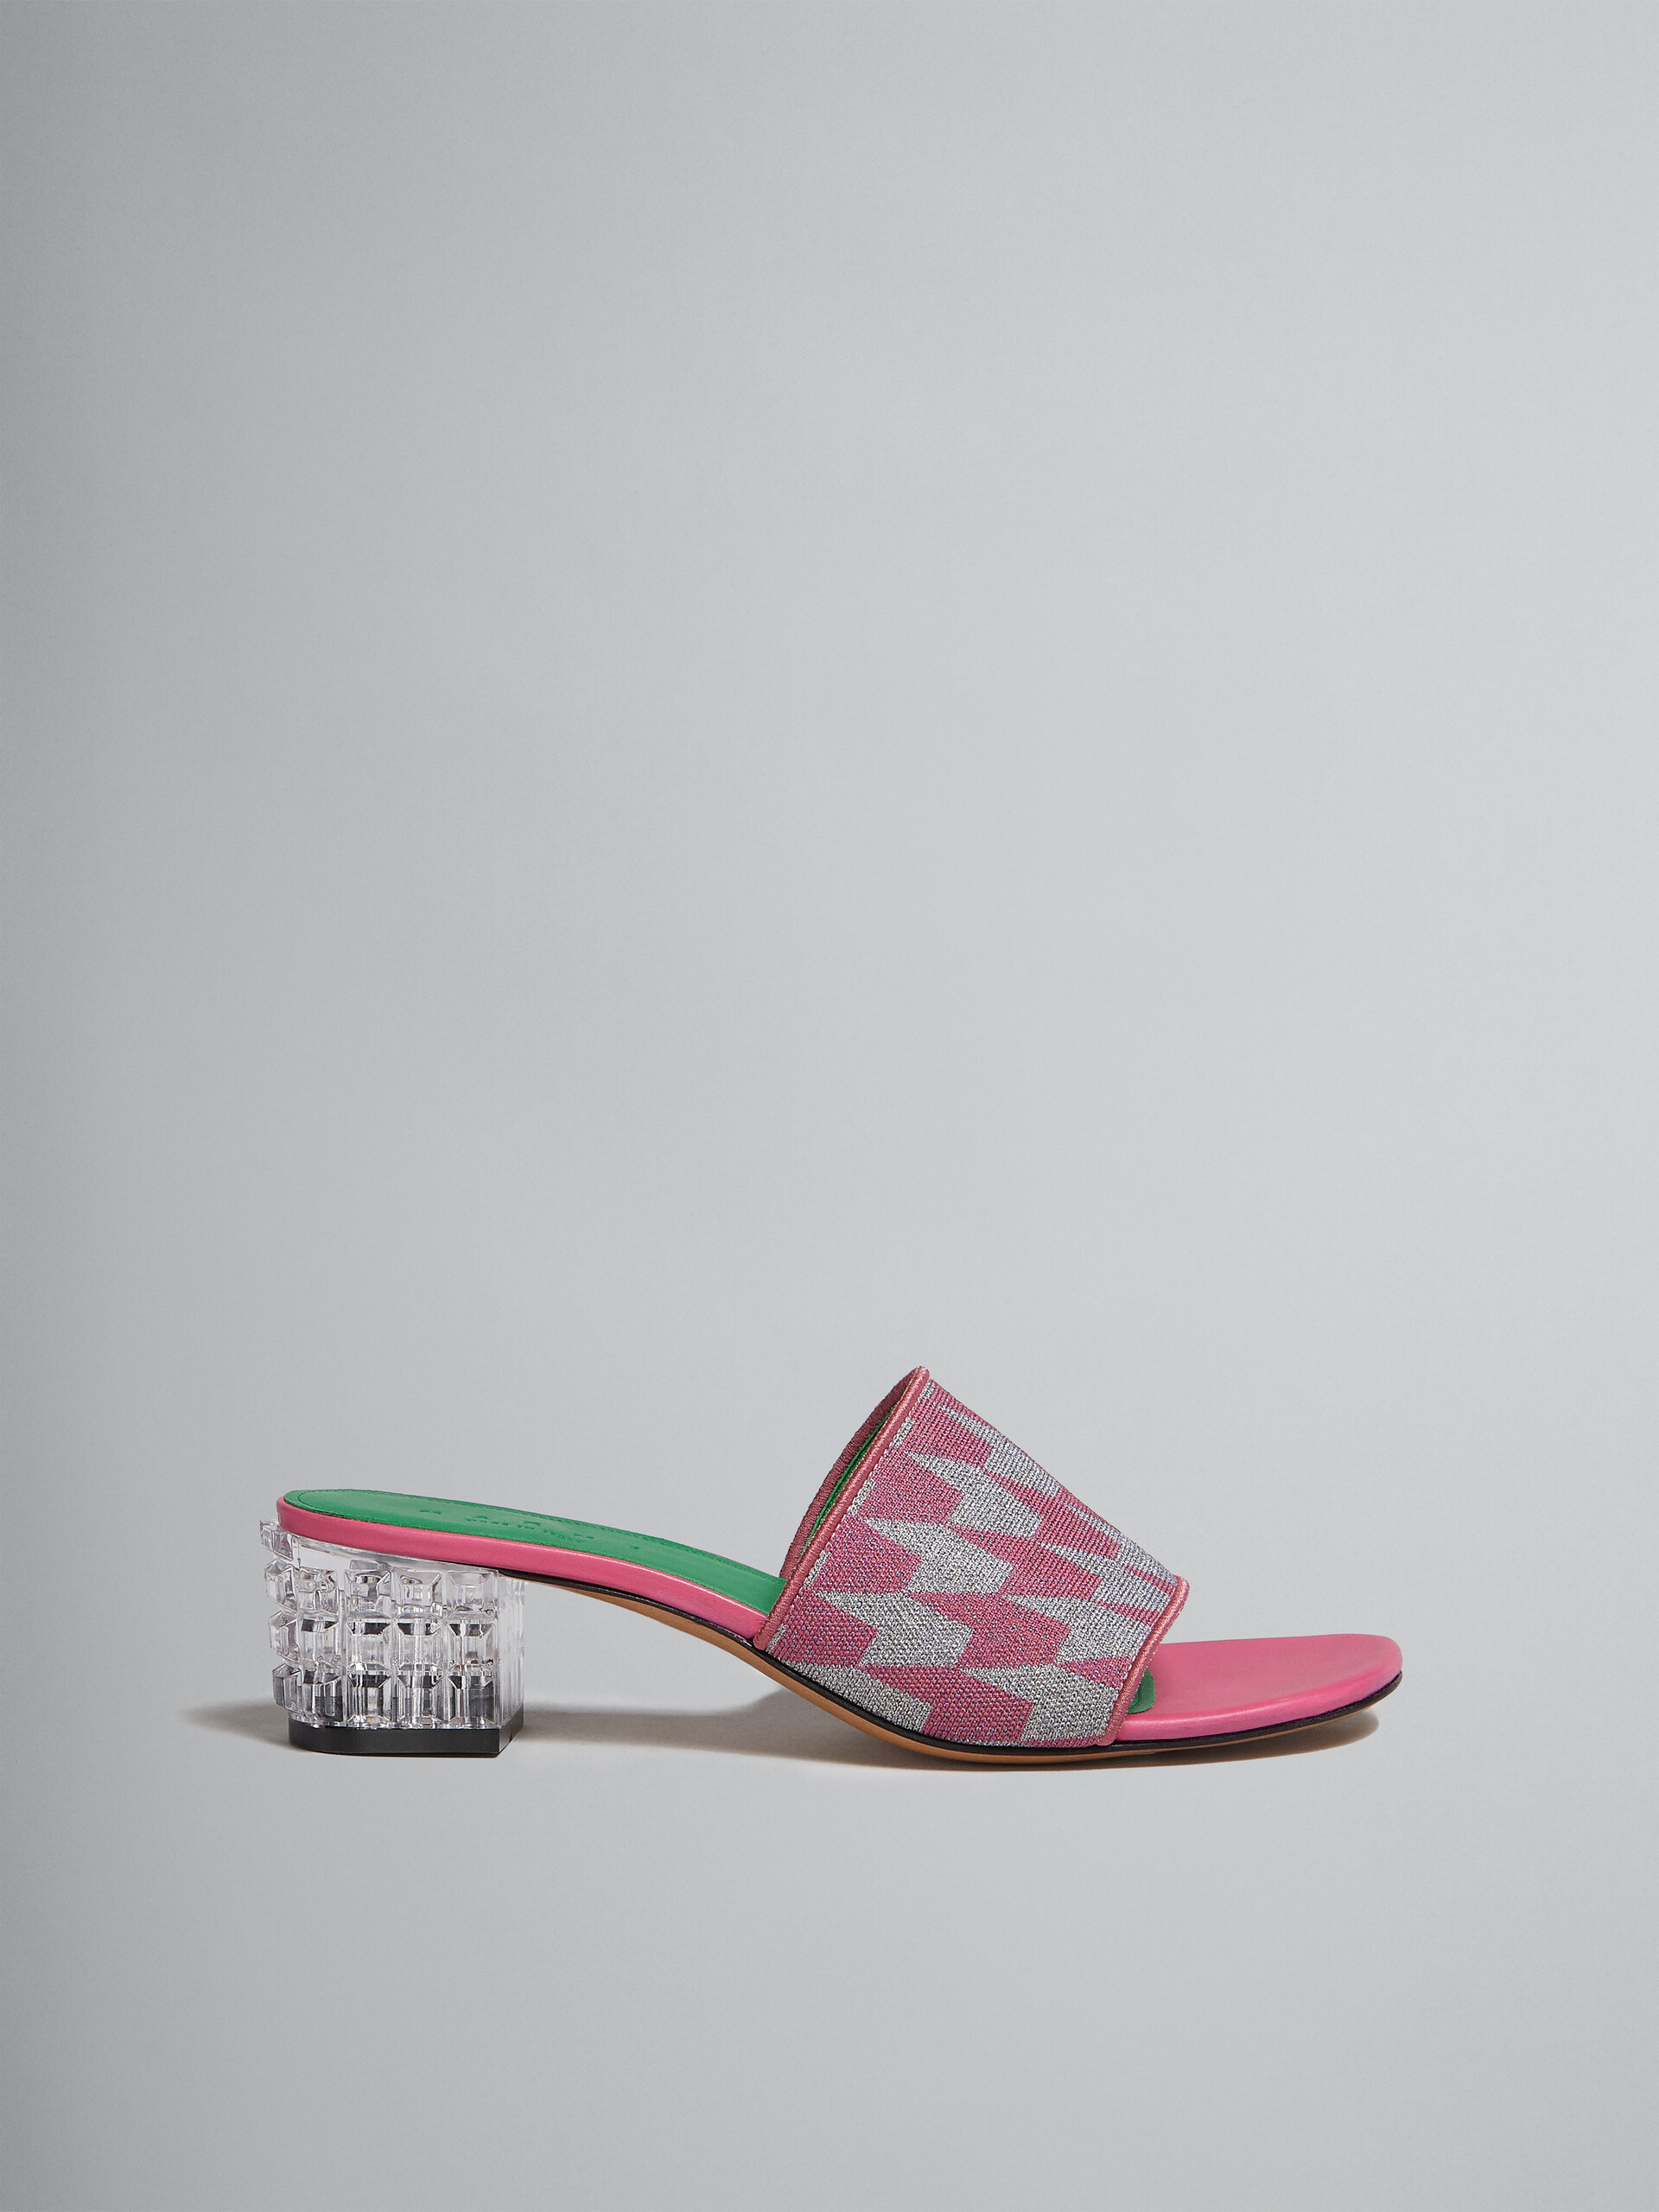 Lurex pink and silver sabot with houndstooth motif - Sandals - Image 1